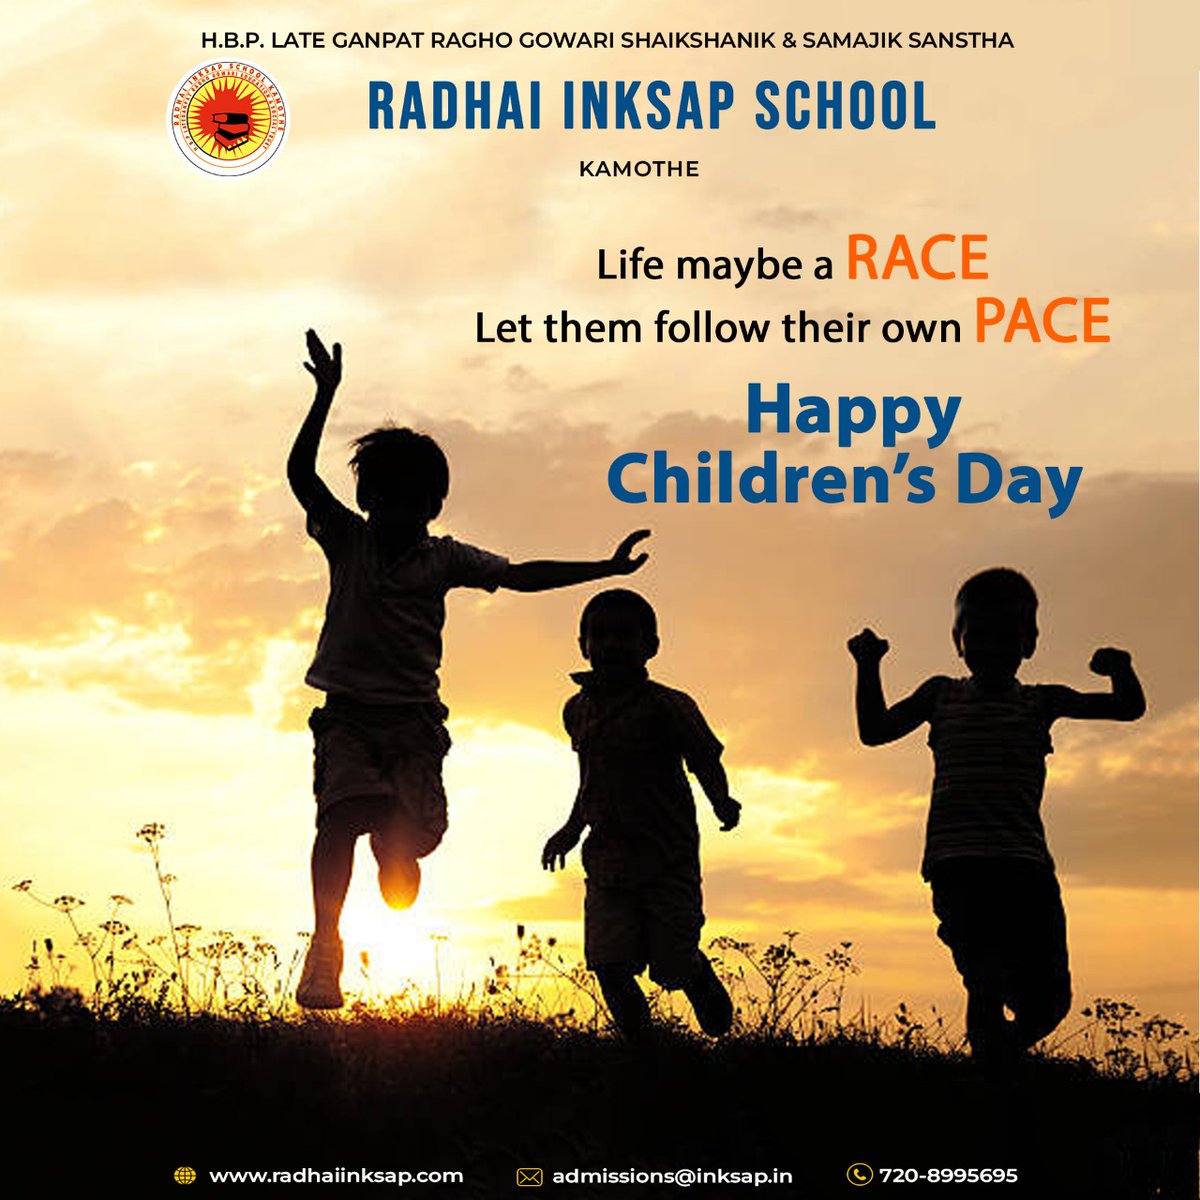 Every child is special! May the innocence they hold in their pure heart stay forever inside them and bring the best results.

The Management, Principal and the teachers of Radhai Inksap School wishes everyone  Happy Children's Day !!!
#children'sday#radhaiinksapschool